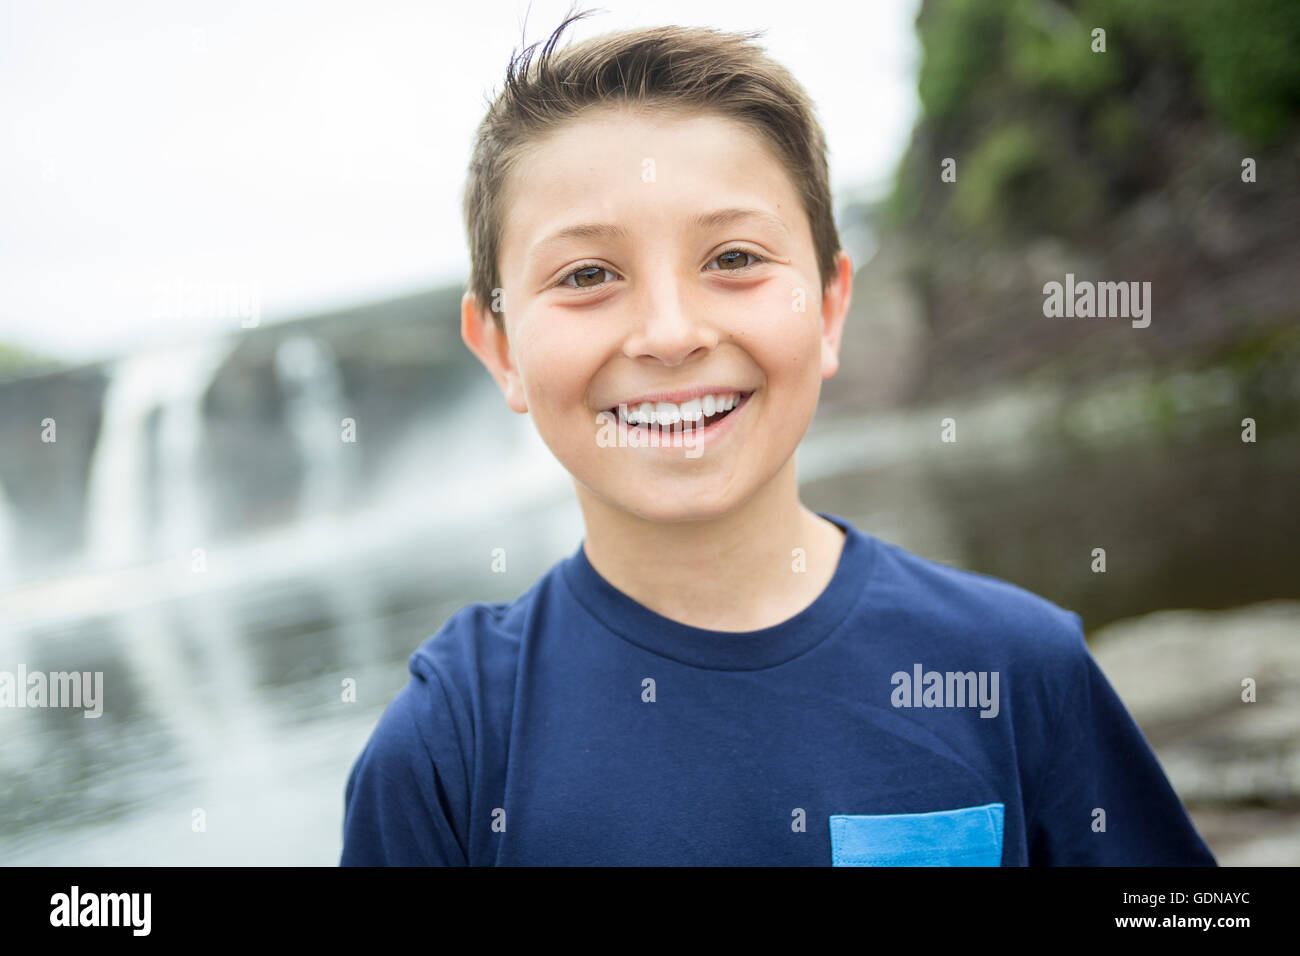 close up of a cute 8 year old boy Stock Photo